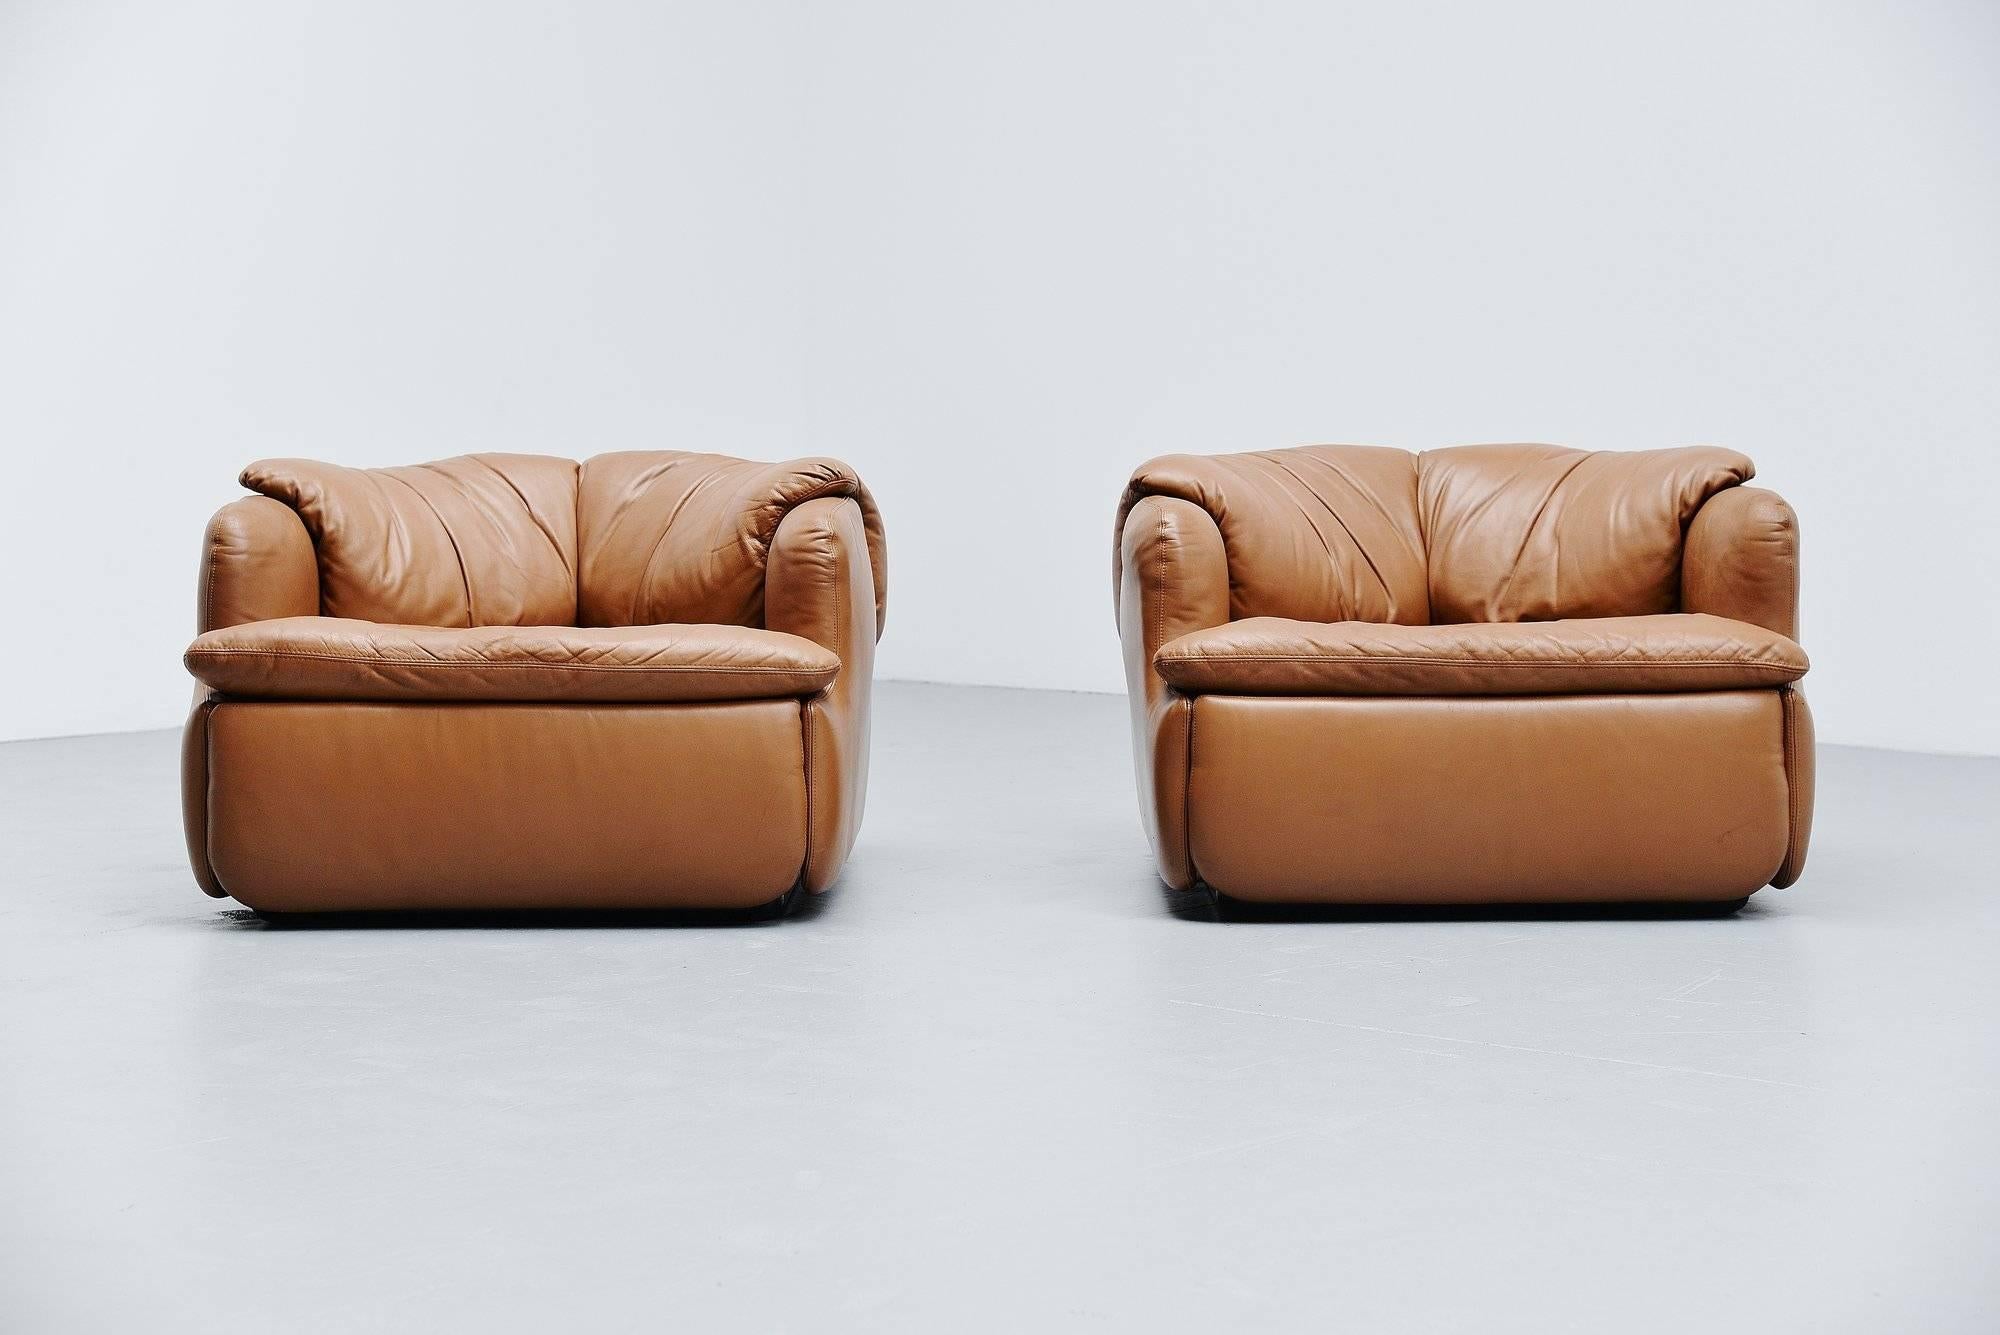 Comfortable pair of low 'Confidential' lounge chairs designed by Alberto Roselli and manufactured by Saporiti Italia, Italy, 1972. The chairs have a very nice camel colored leather seat and because they are completely filled with foam they are very